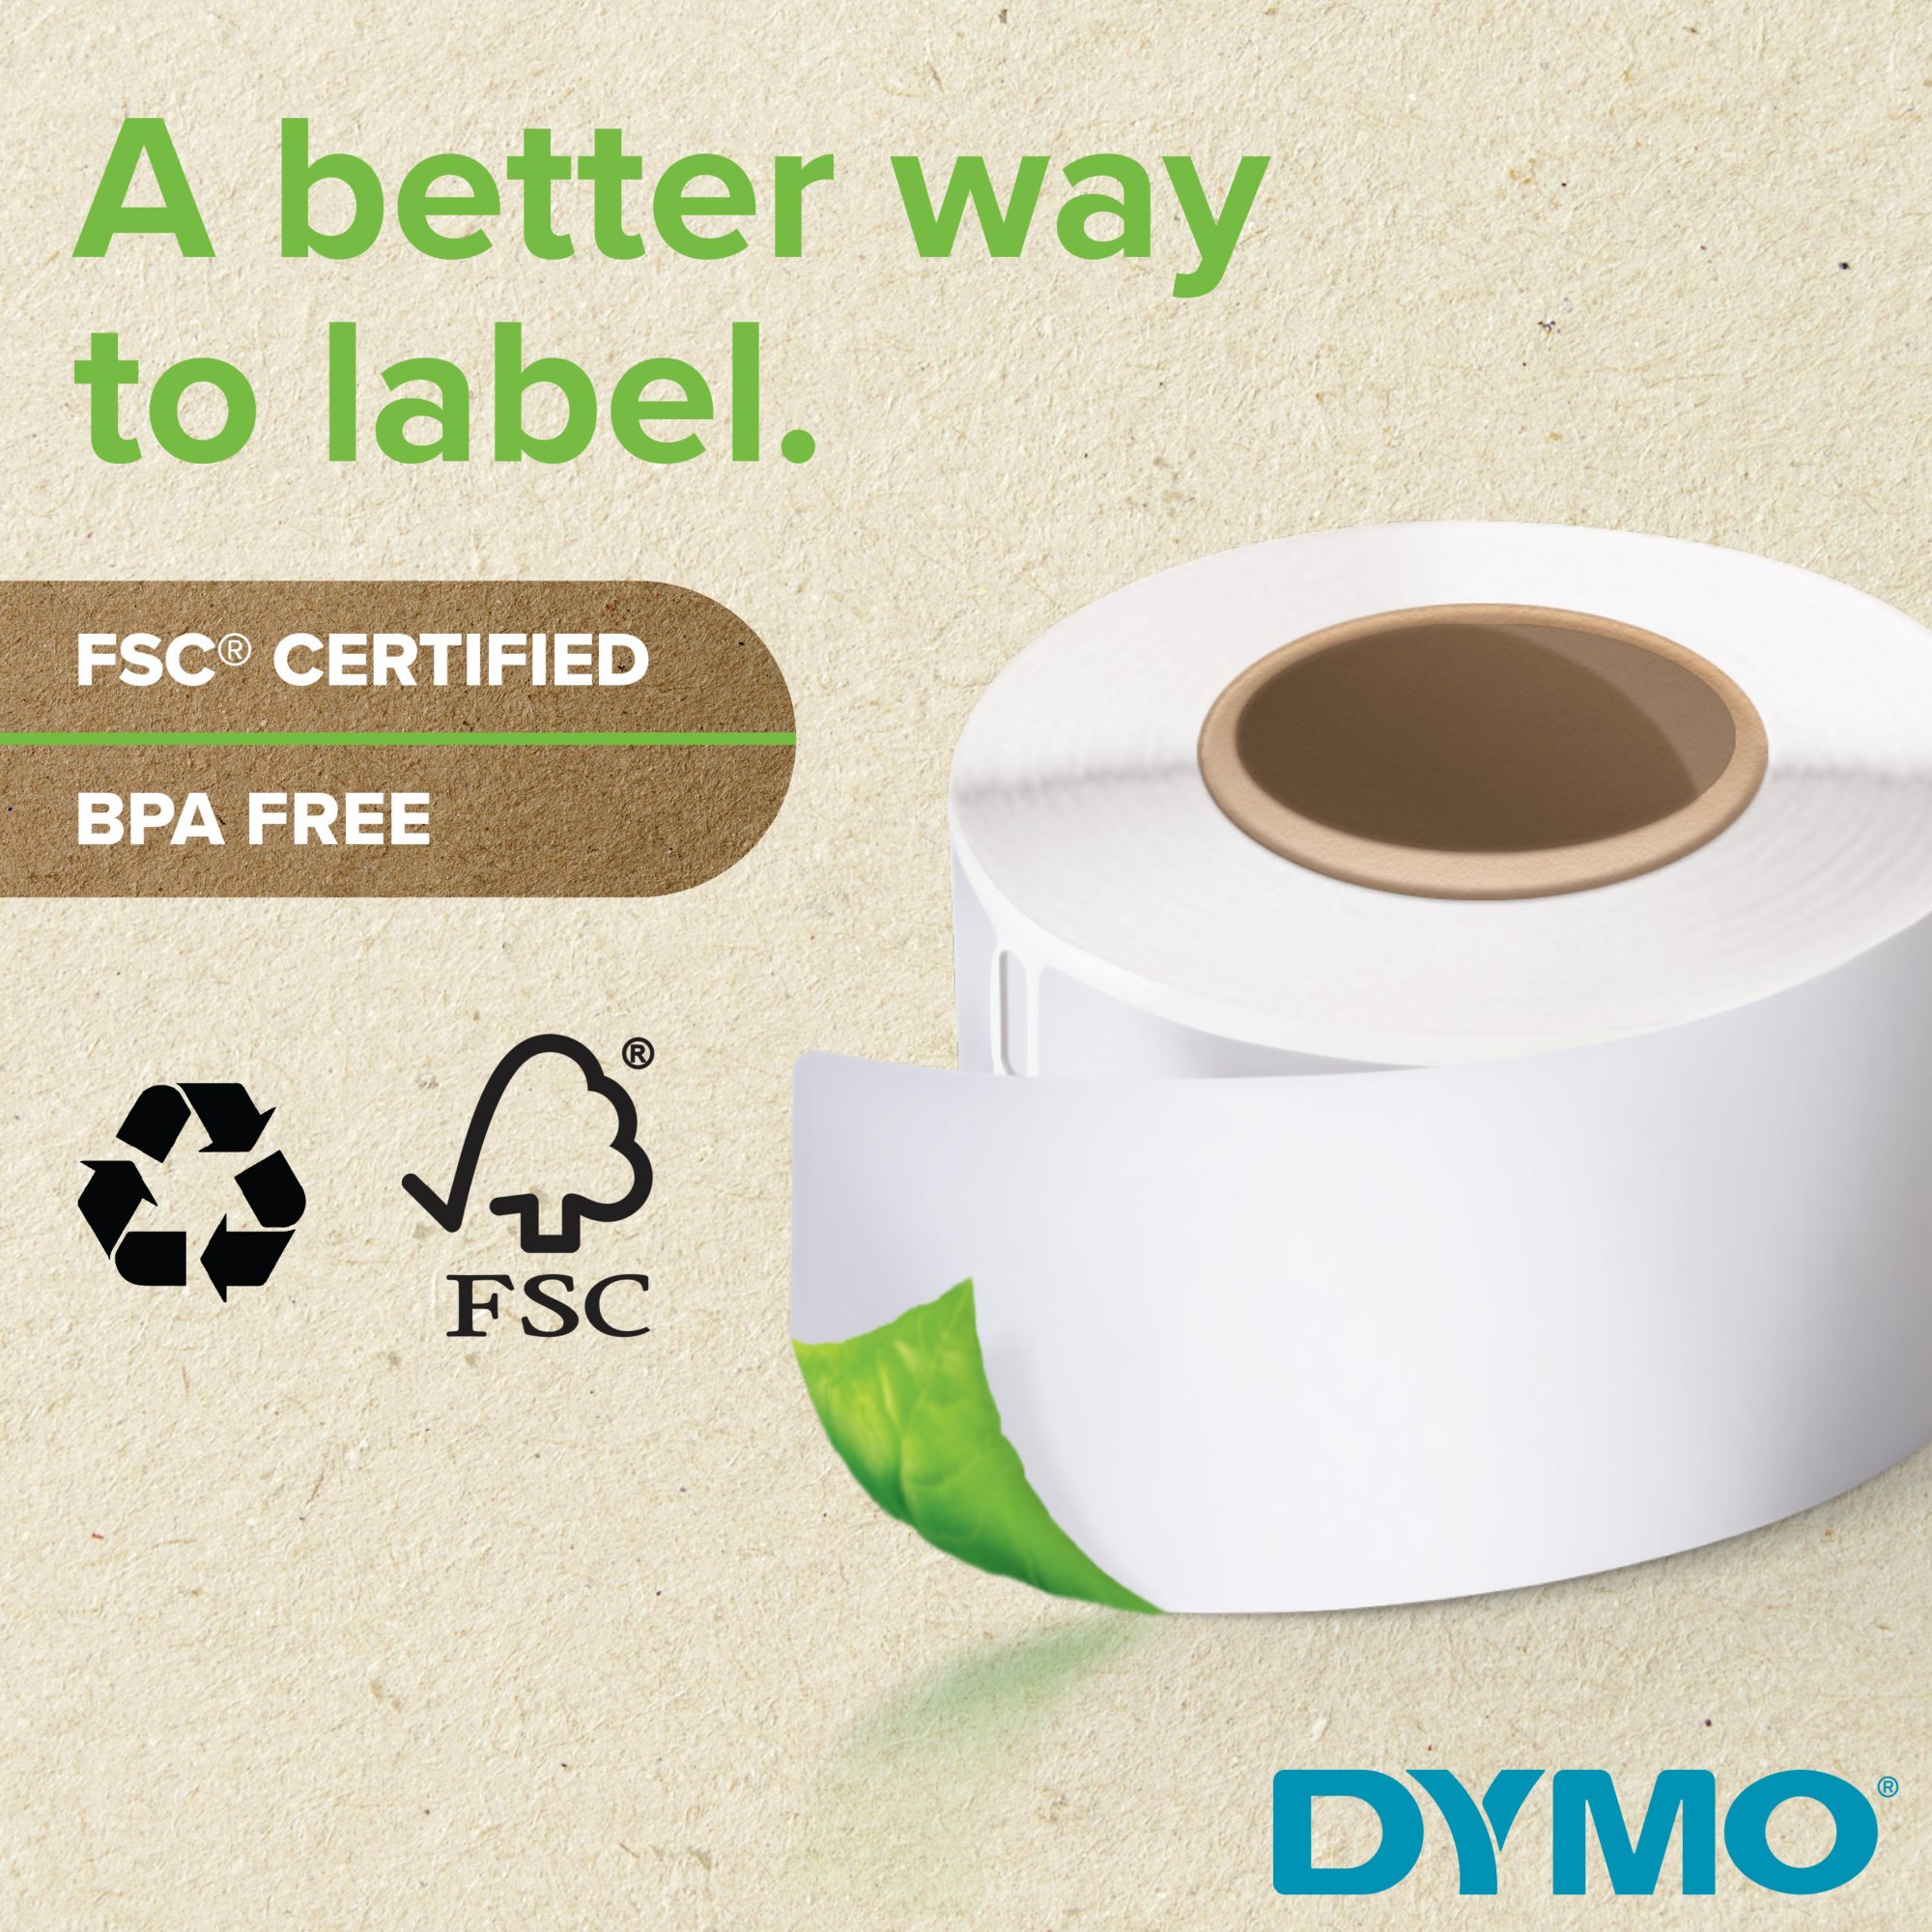 6 Rolls of Dymo 30269 Compatible Clear Shipping Labels for LabelWriter  Label Printers, 2-5/16 x 4 inch (300 Labels Per Roll)